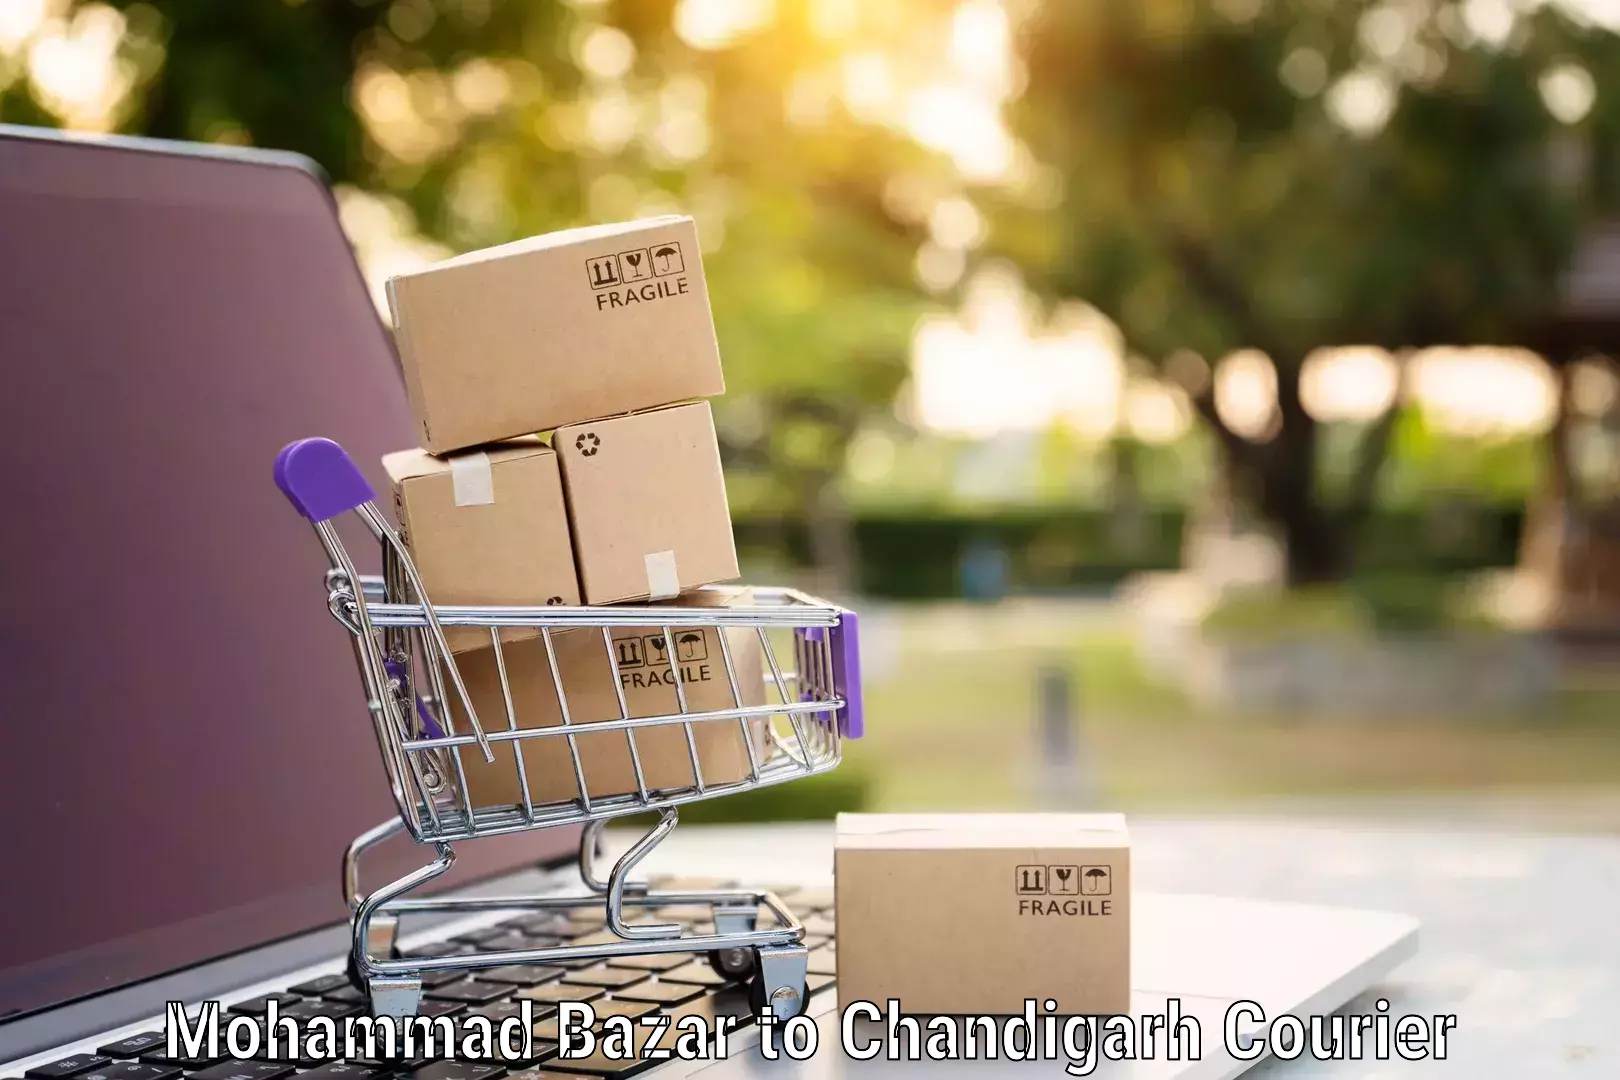 Furniture transport specialists Mohammad Bazar to Chandigarh